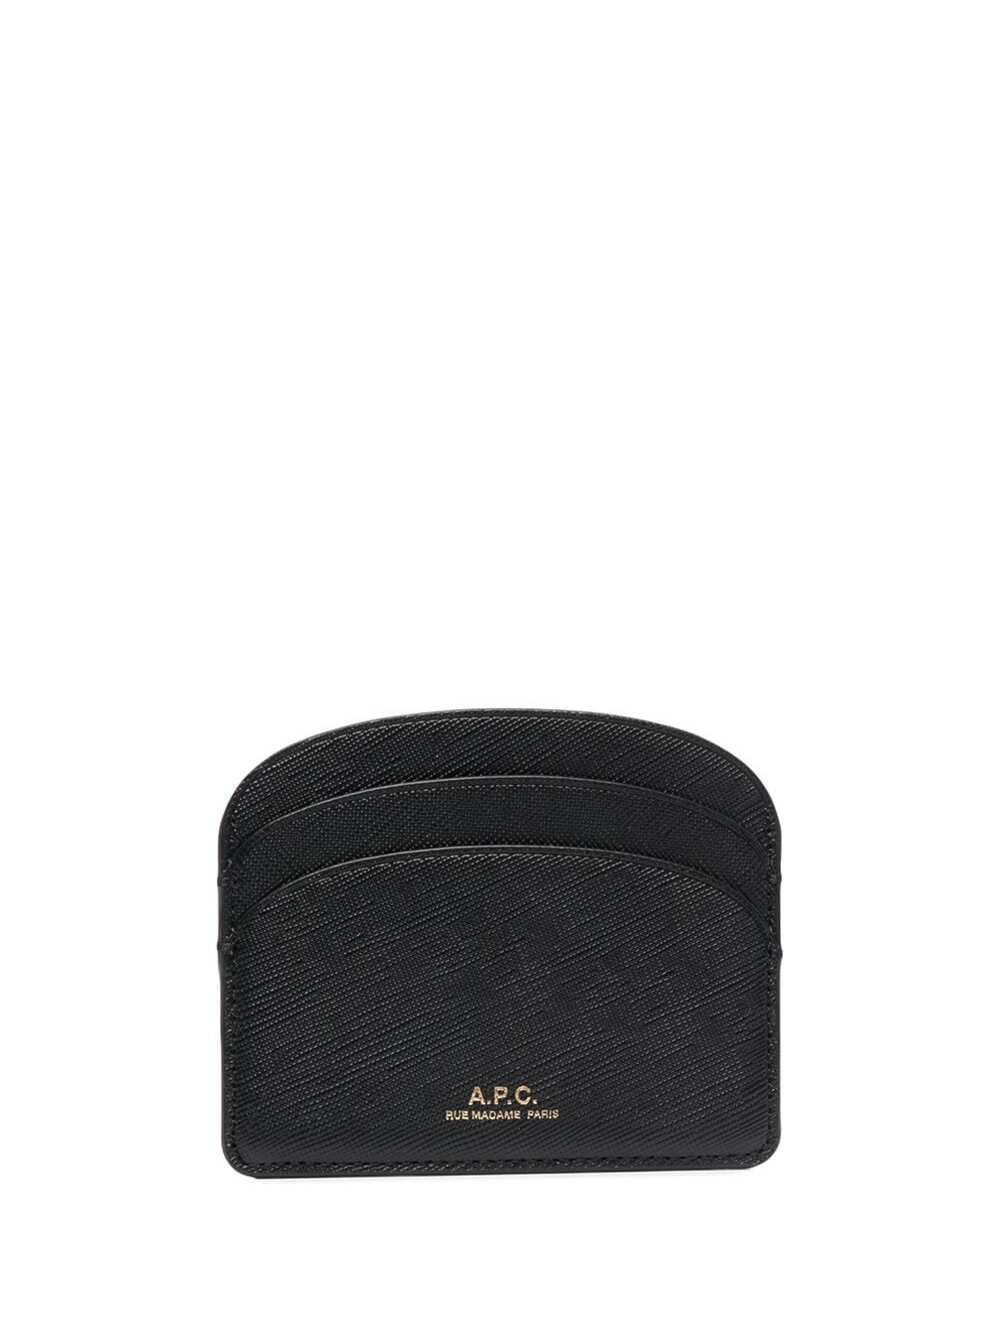 A.P.C. Womans Demi Lune Black Hammered Leather Cardholder